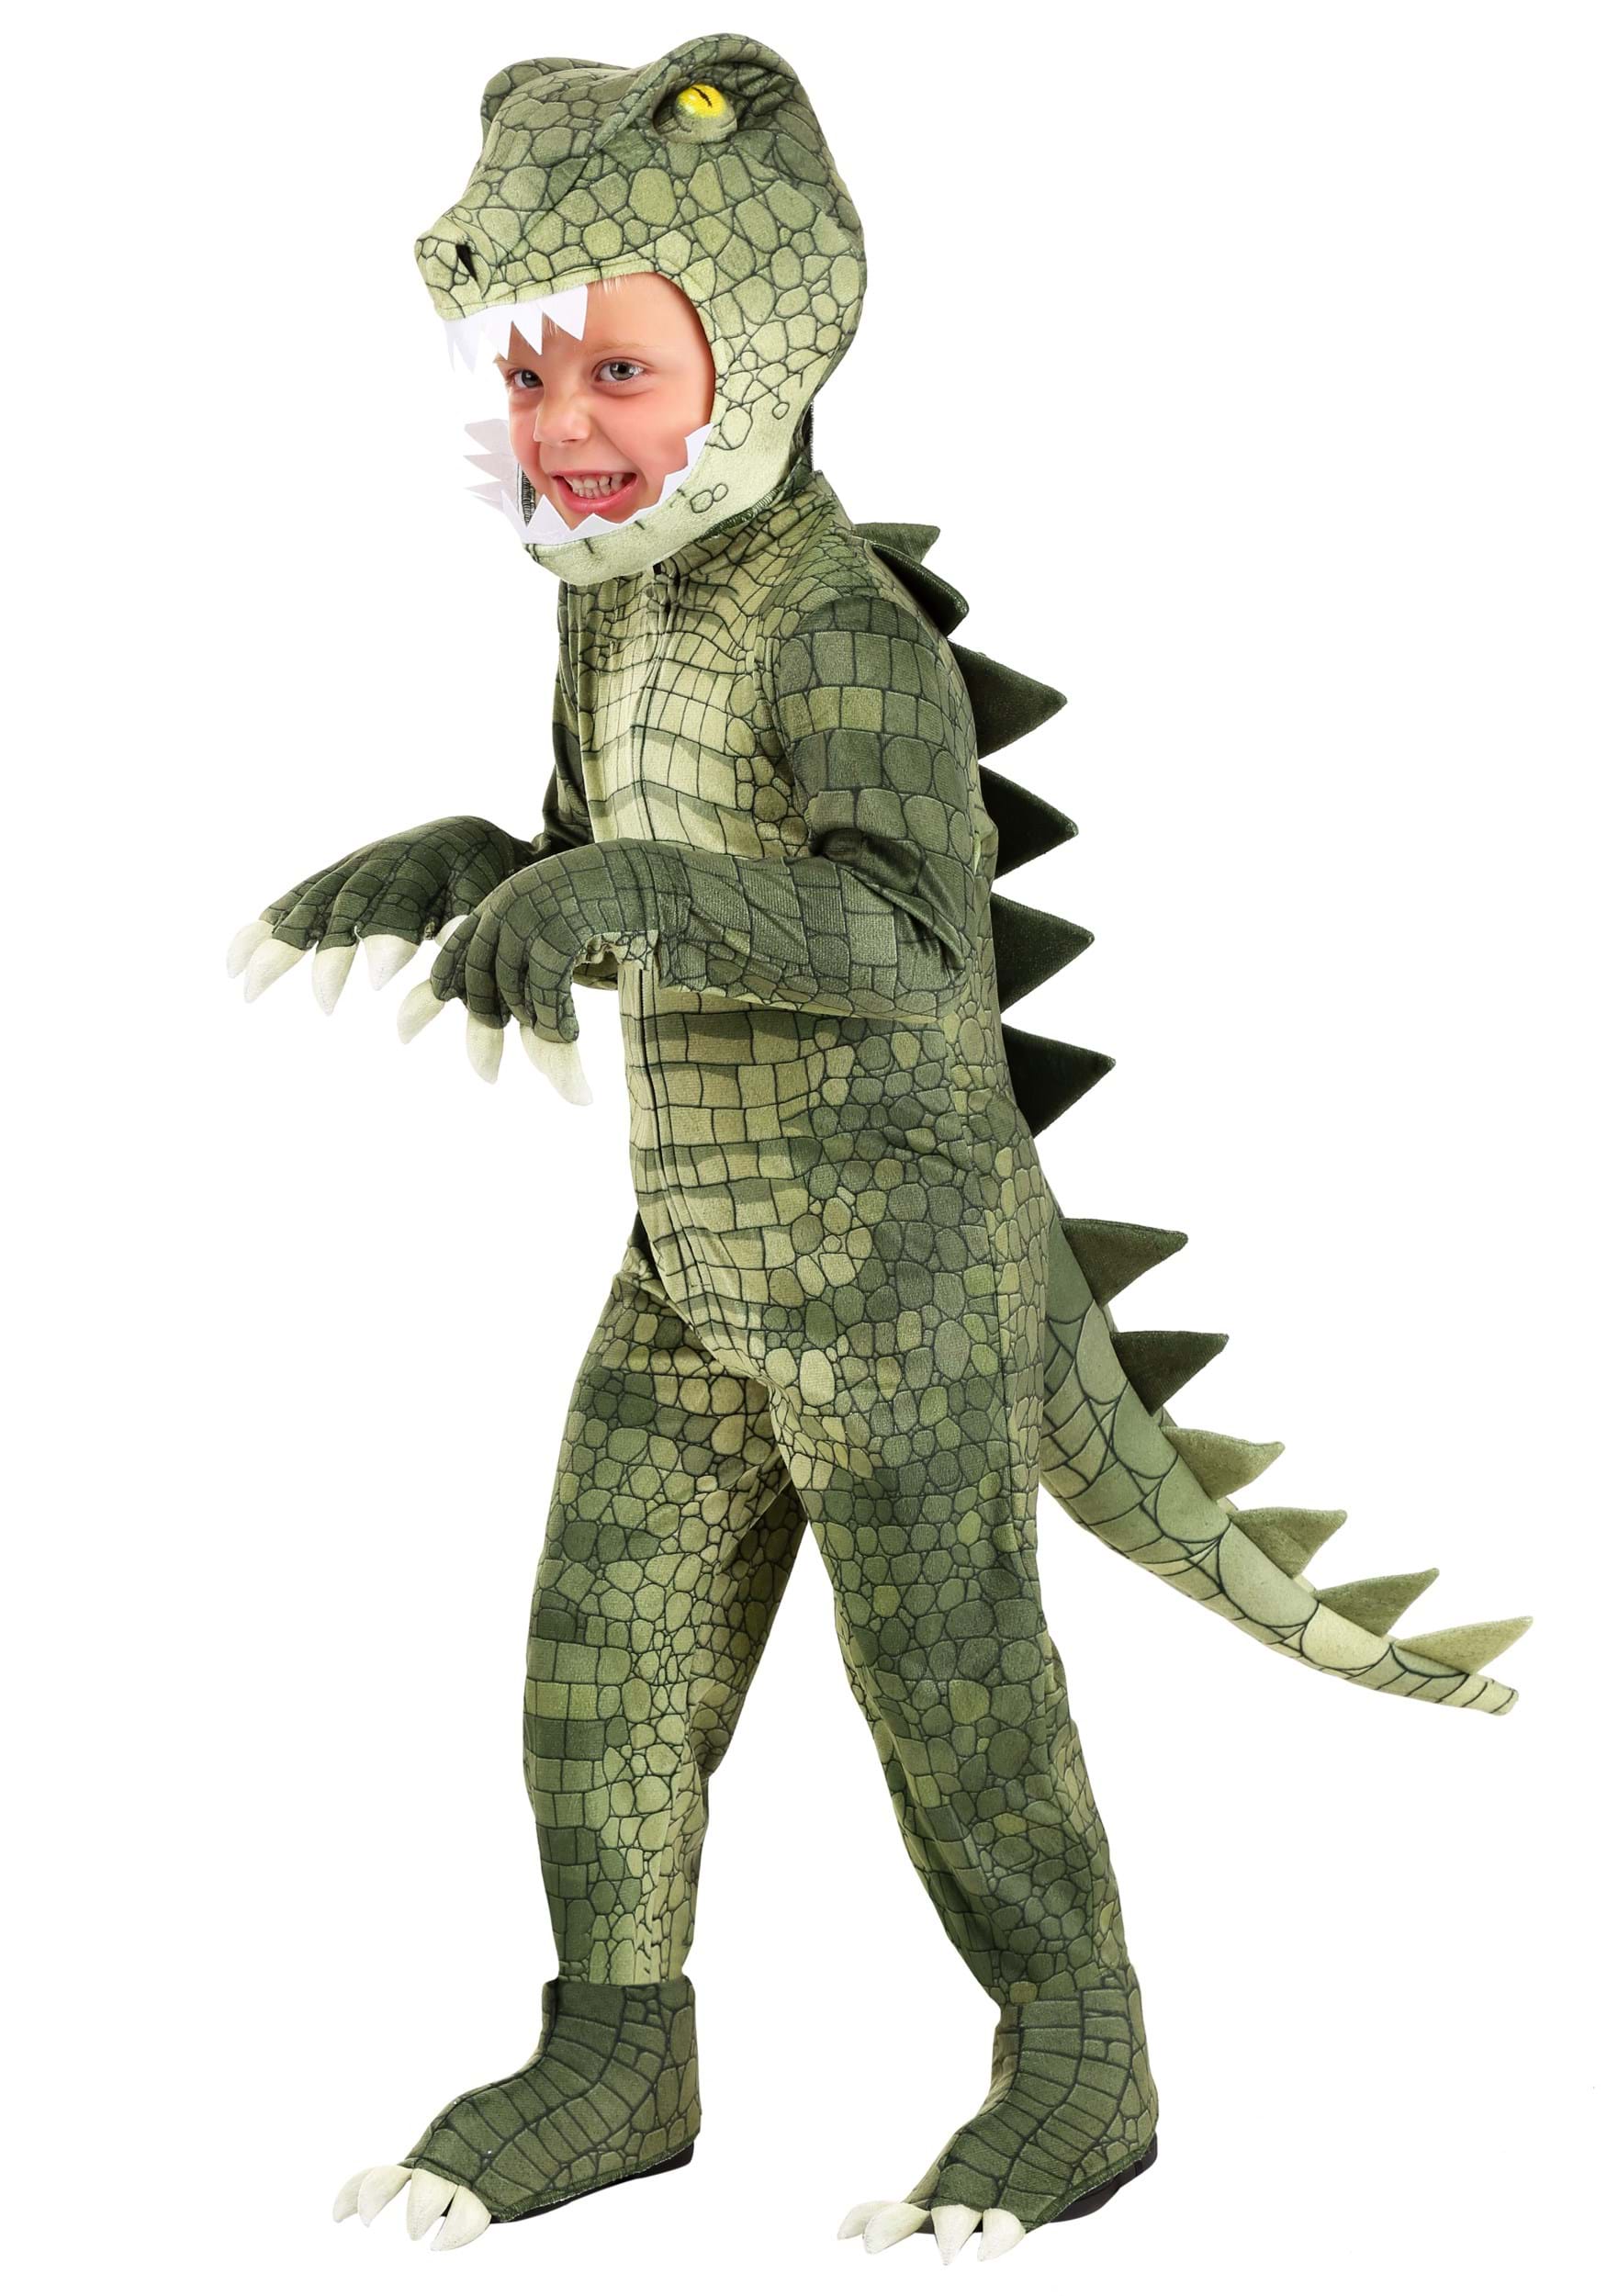 Photos - Fancy Dress Toddler FUN Costumes Dangerous Green Alligator Costume for 's Brown/Gre 